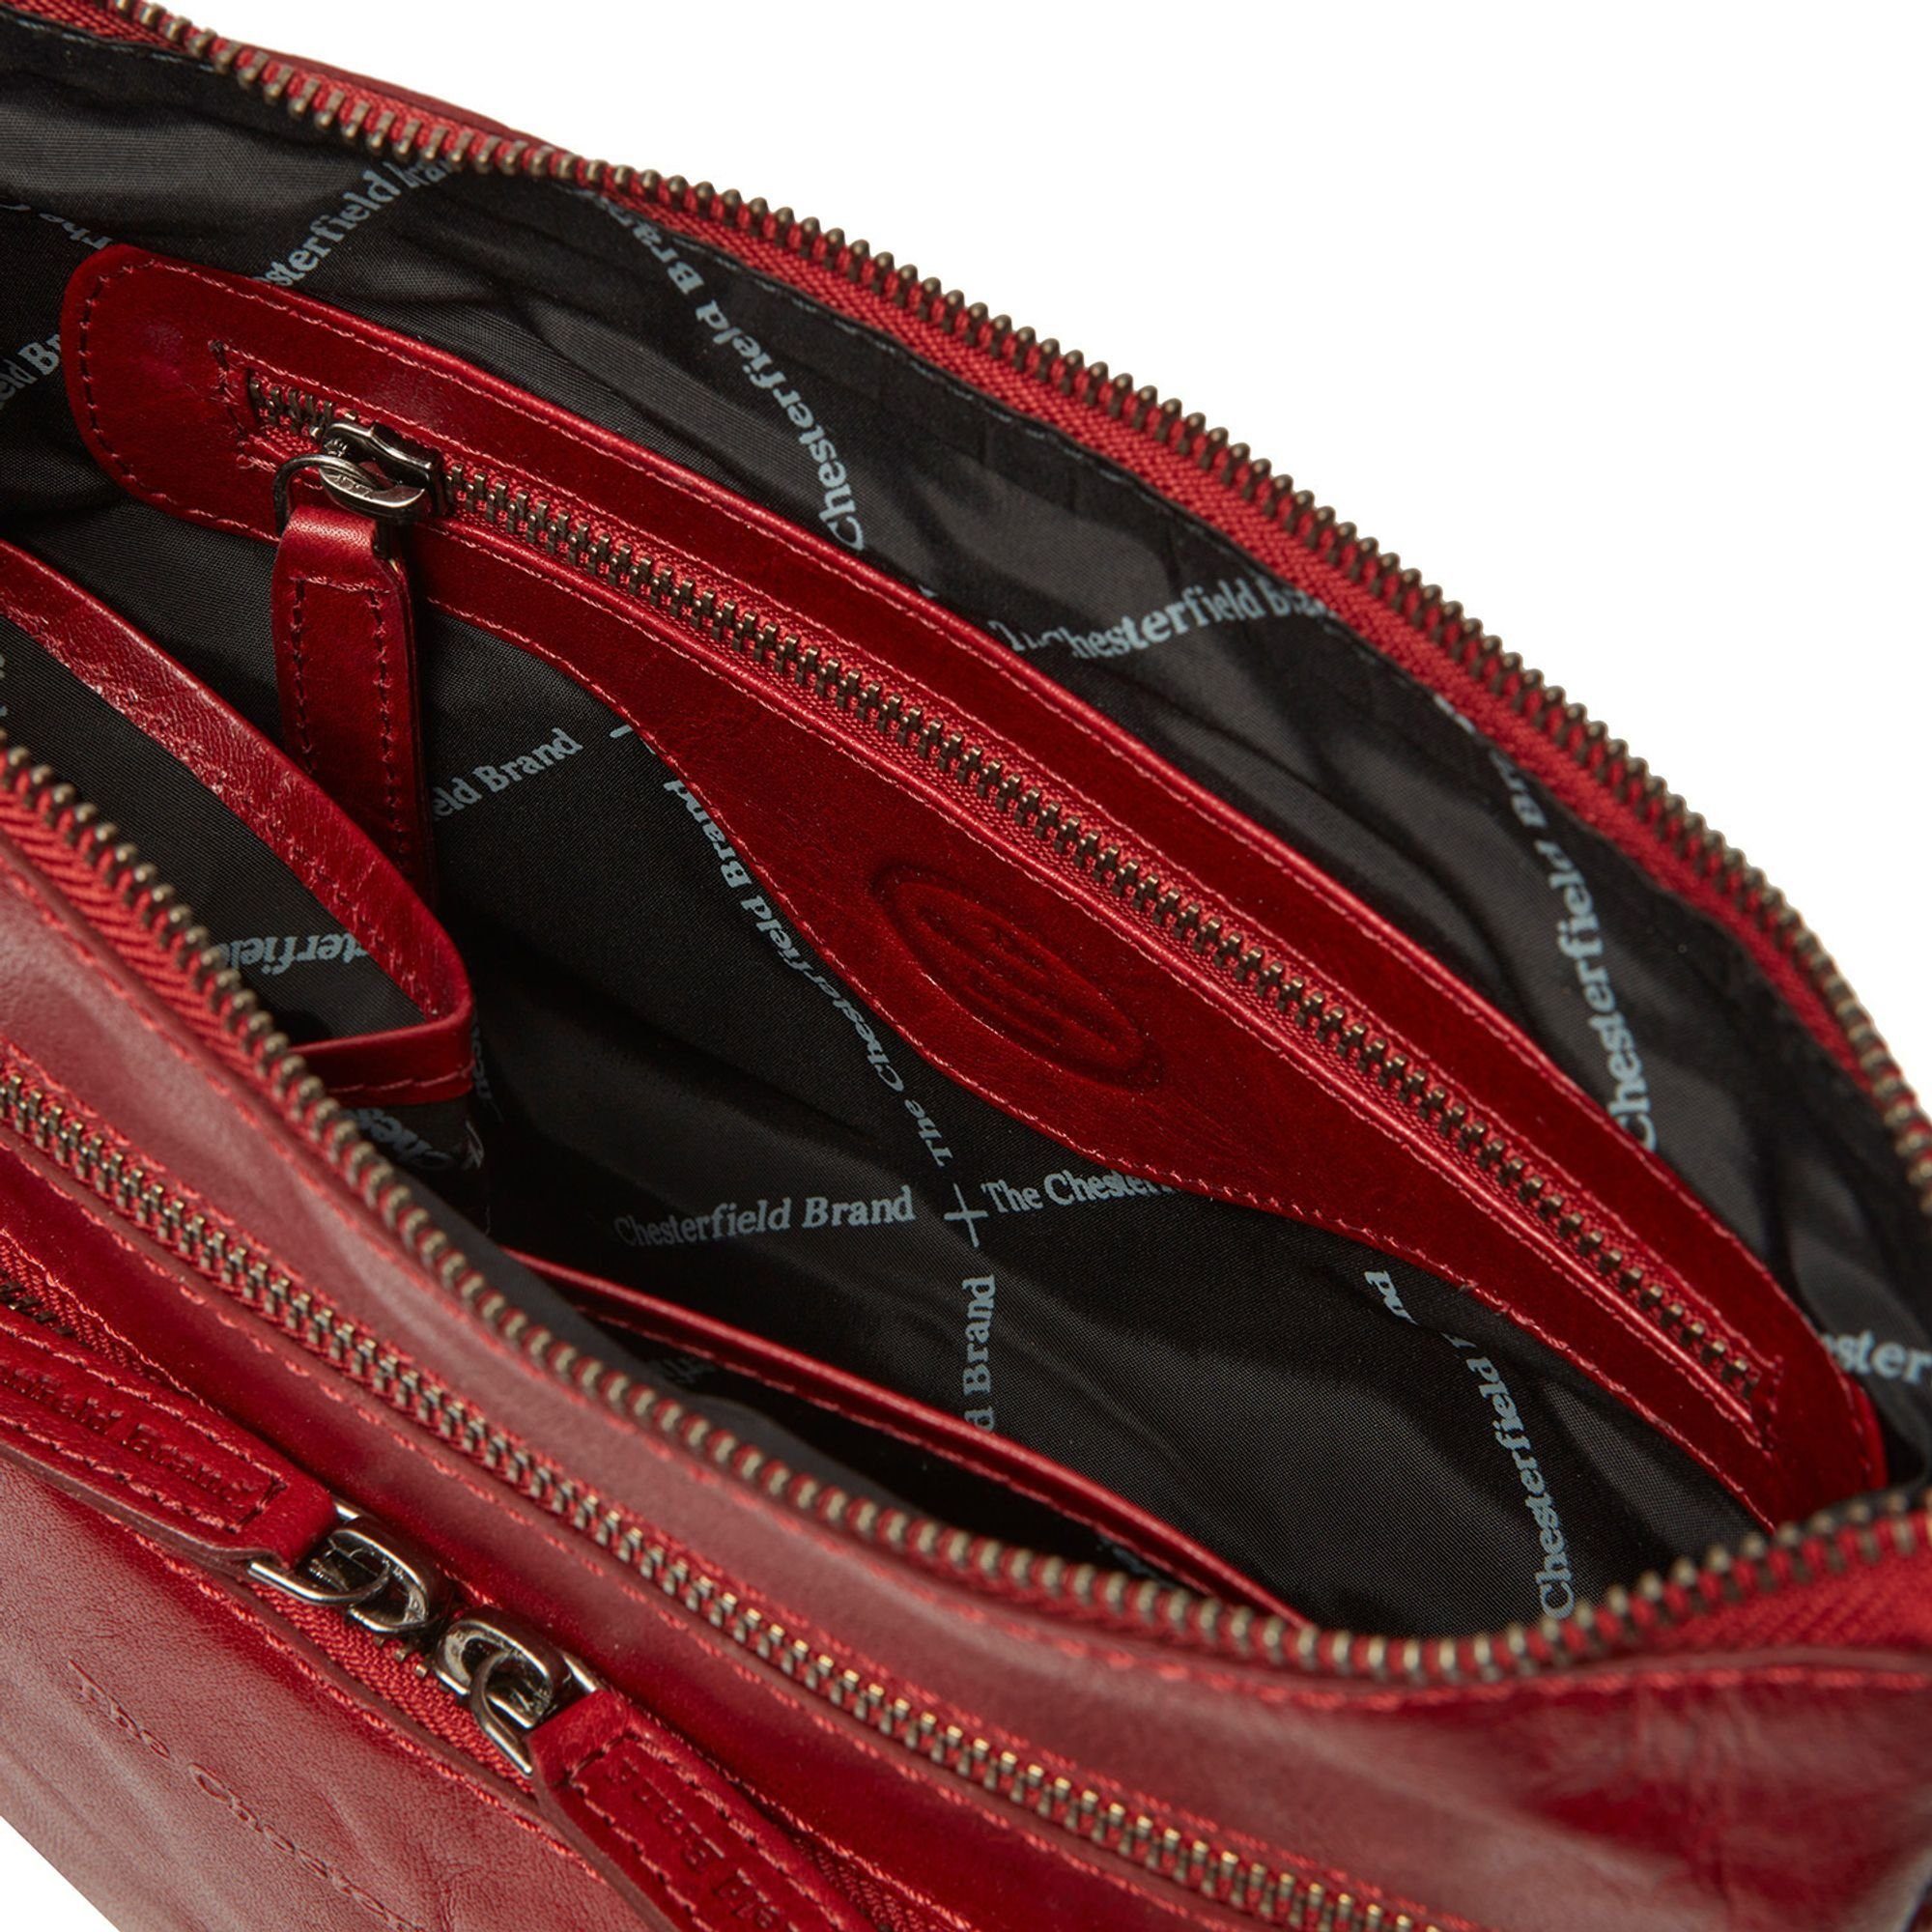 The Chesterfield Brand Schultertasche Tula, red Leder